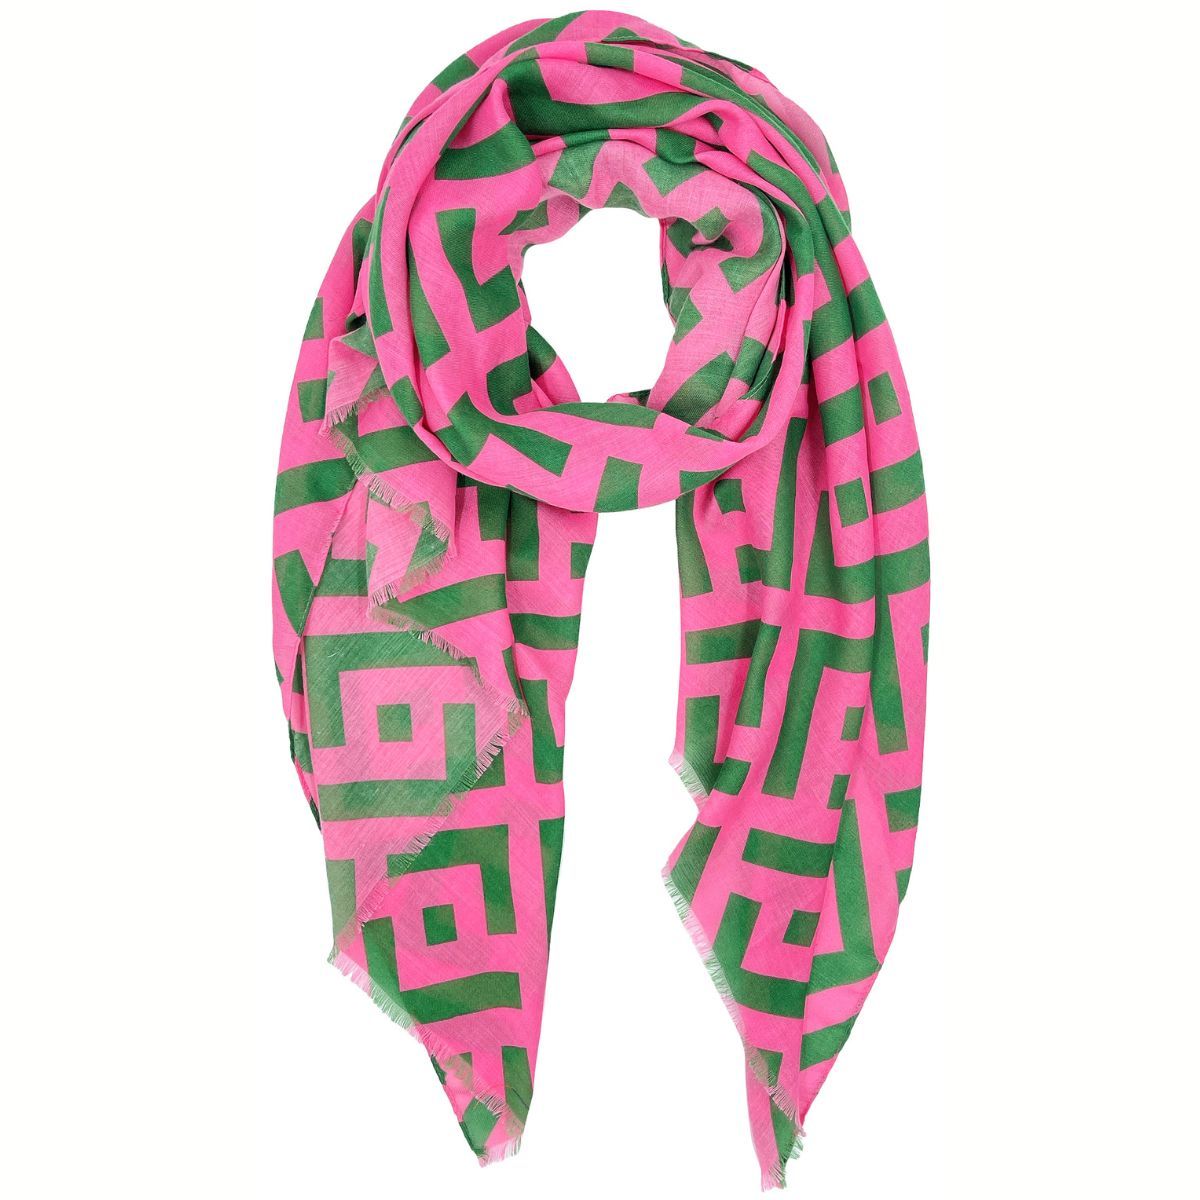 Scarf Wrap Lux Geo Print Pink Green for Women